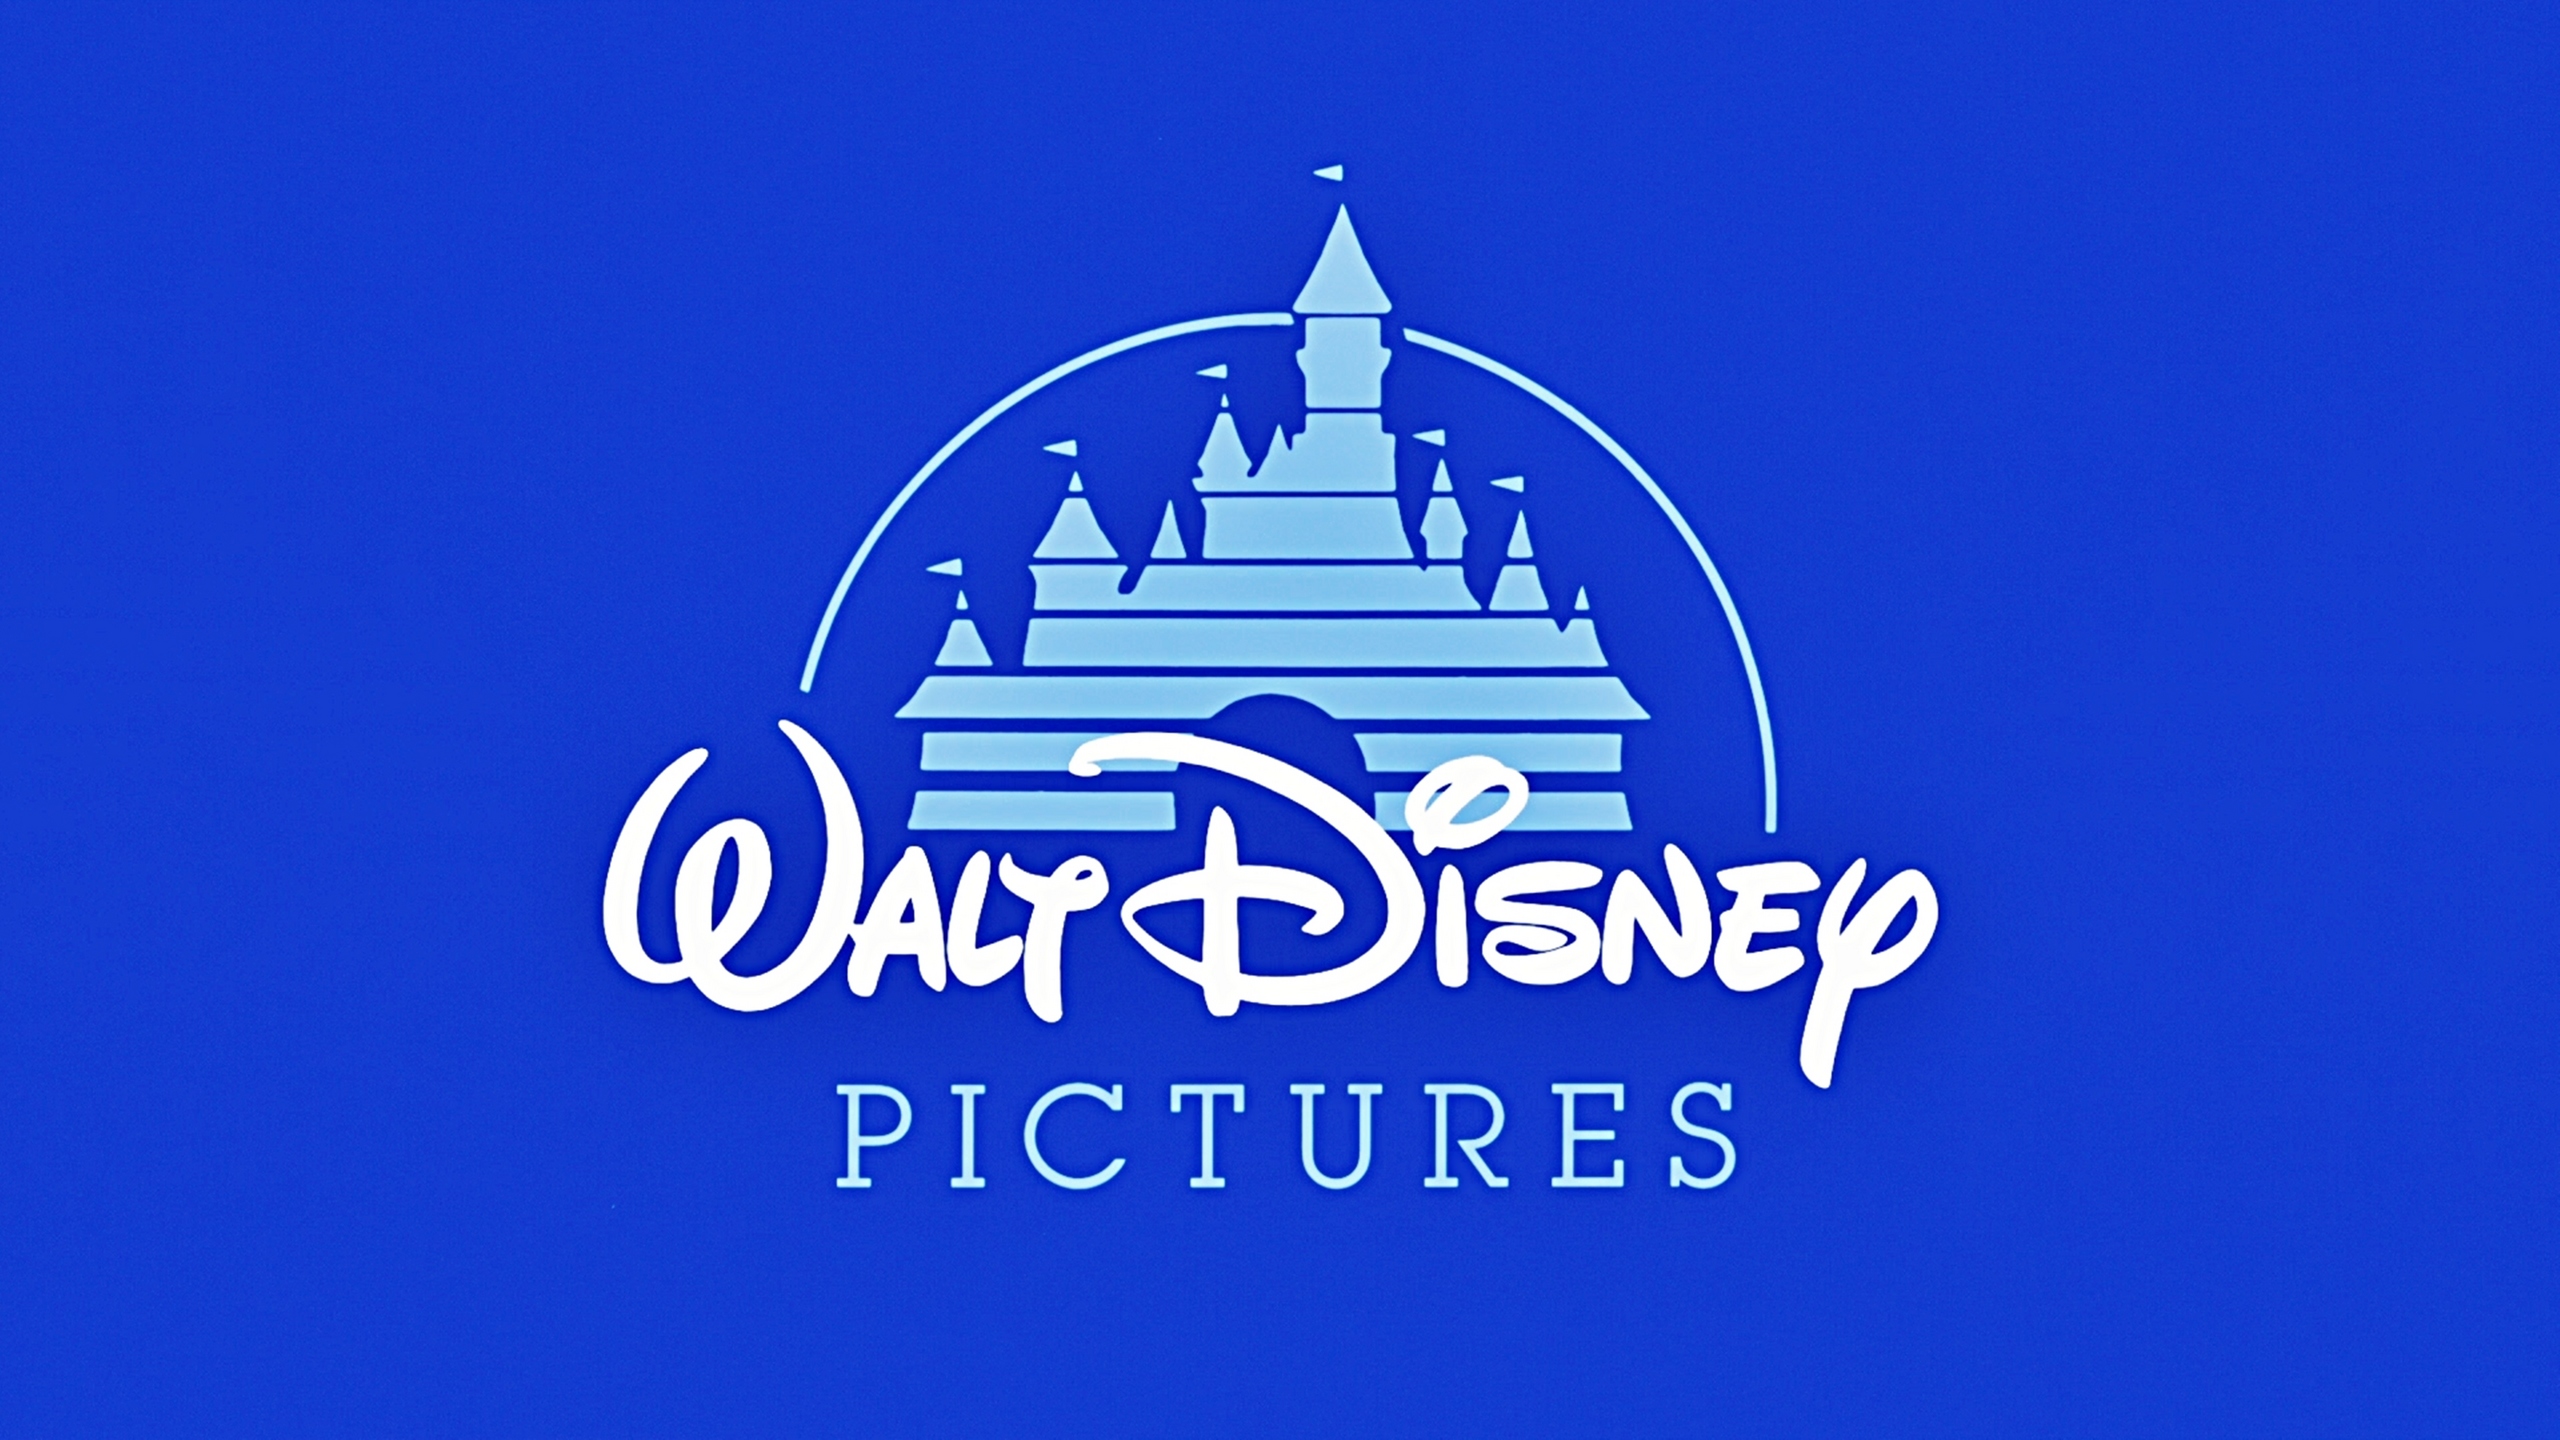 What's Going On With The 'D' In The Disney Logo? | Mental Floss